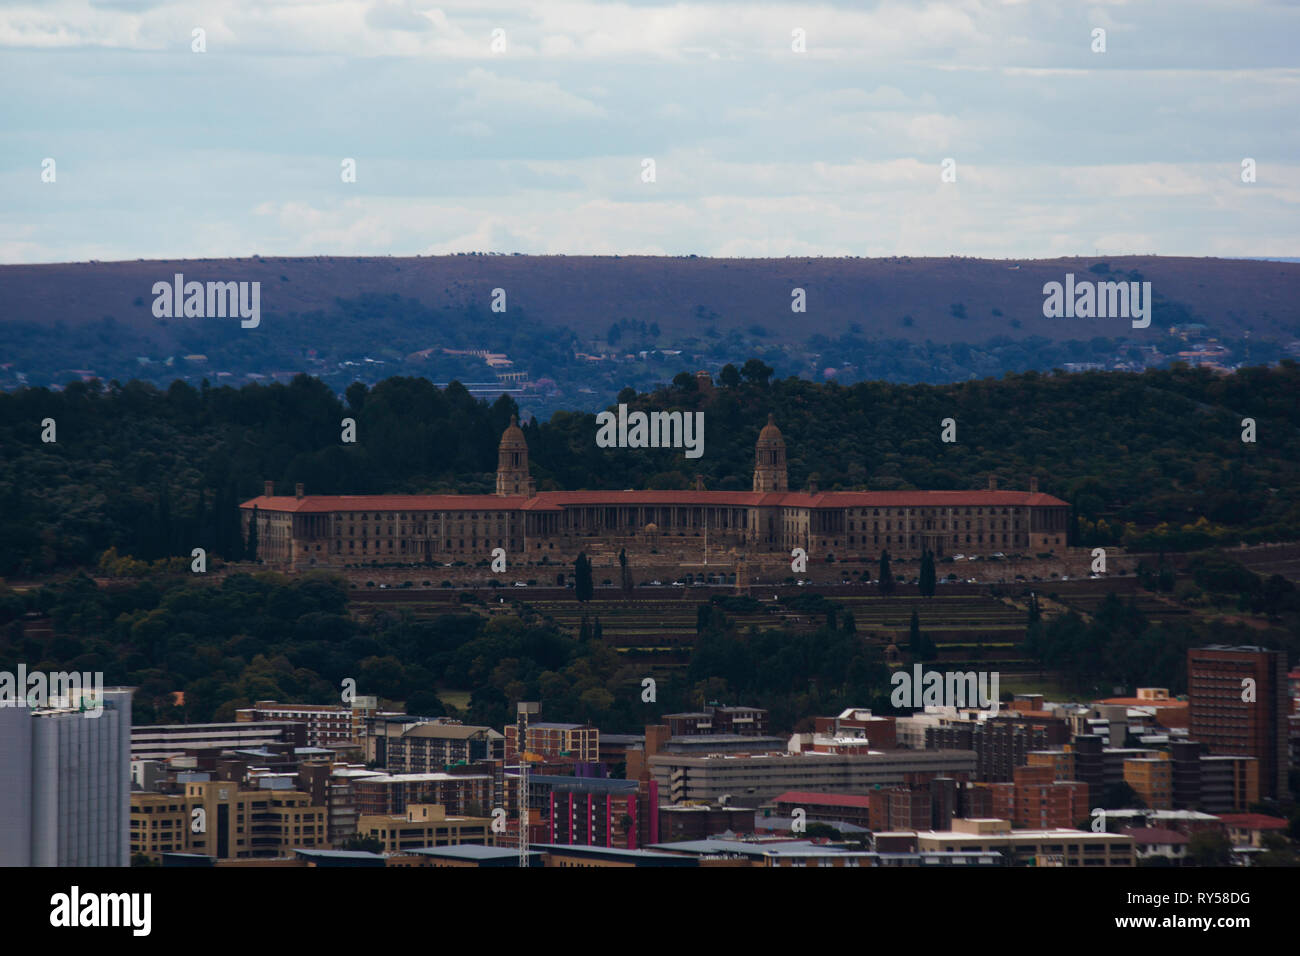 The Union Buildings Of South Africa Overlooking The Capital Of Pretoria Stock Photo